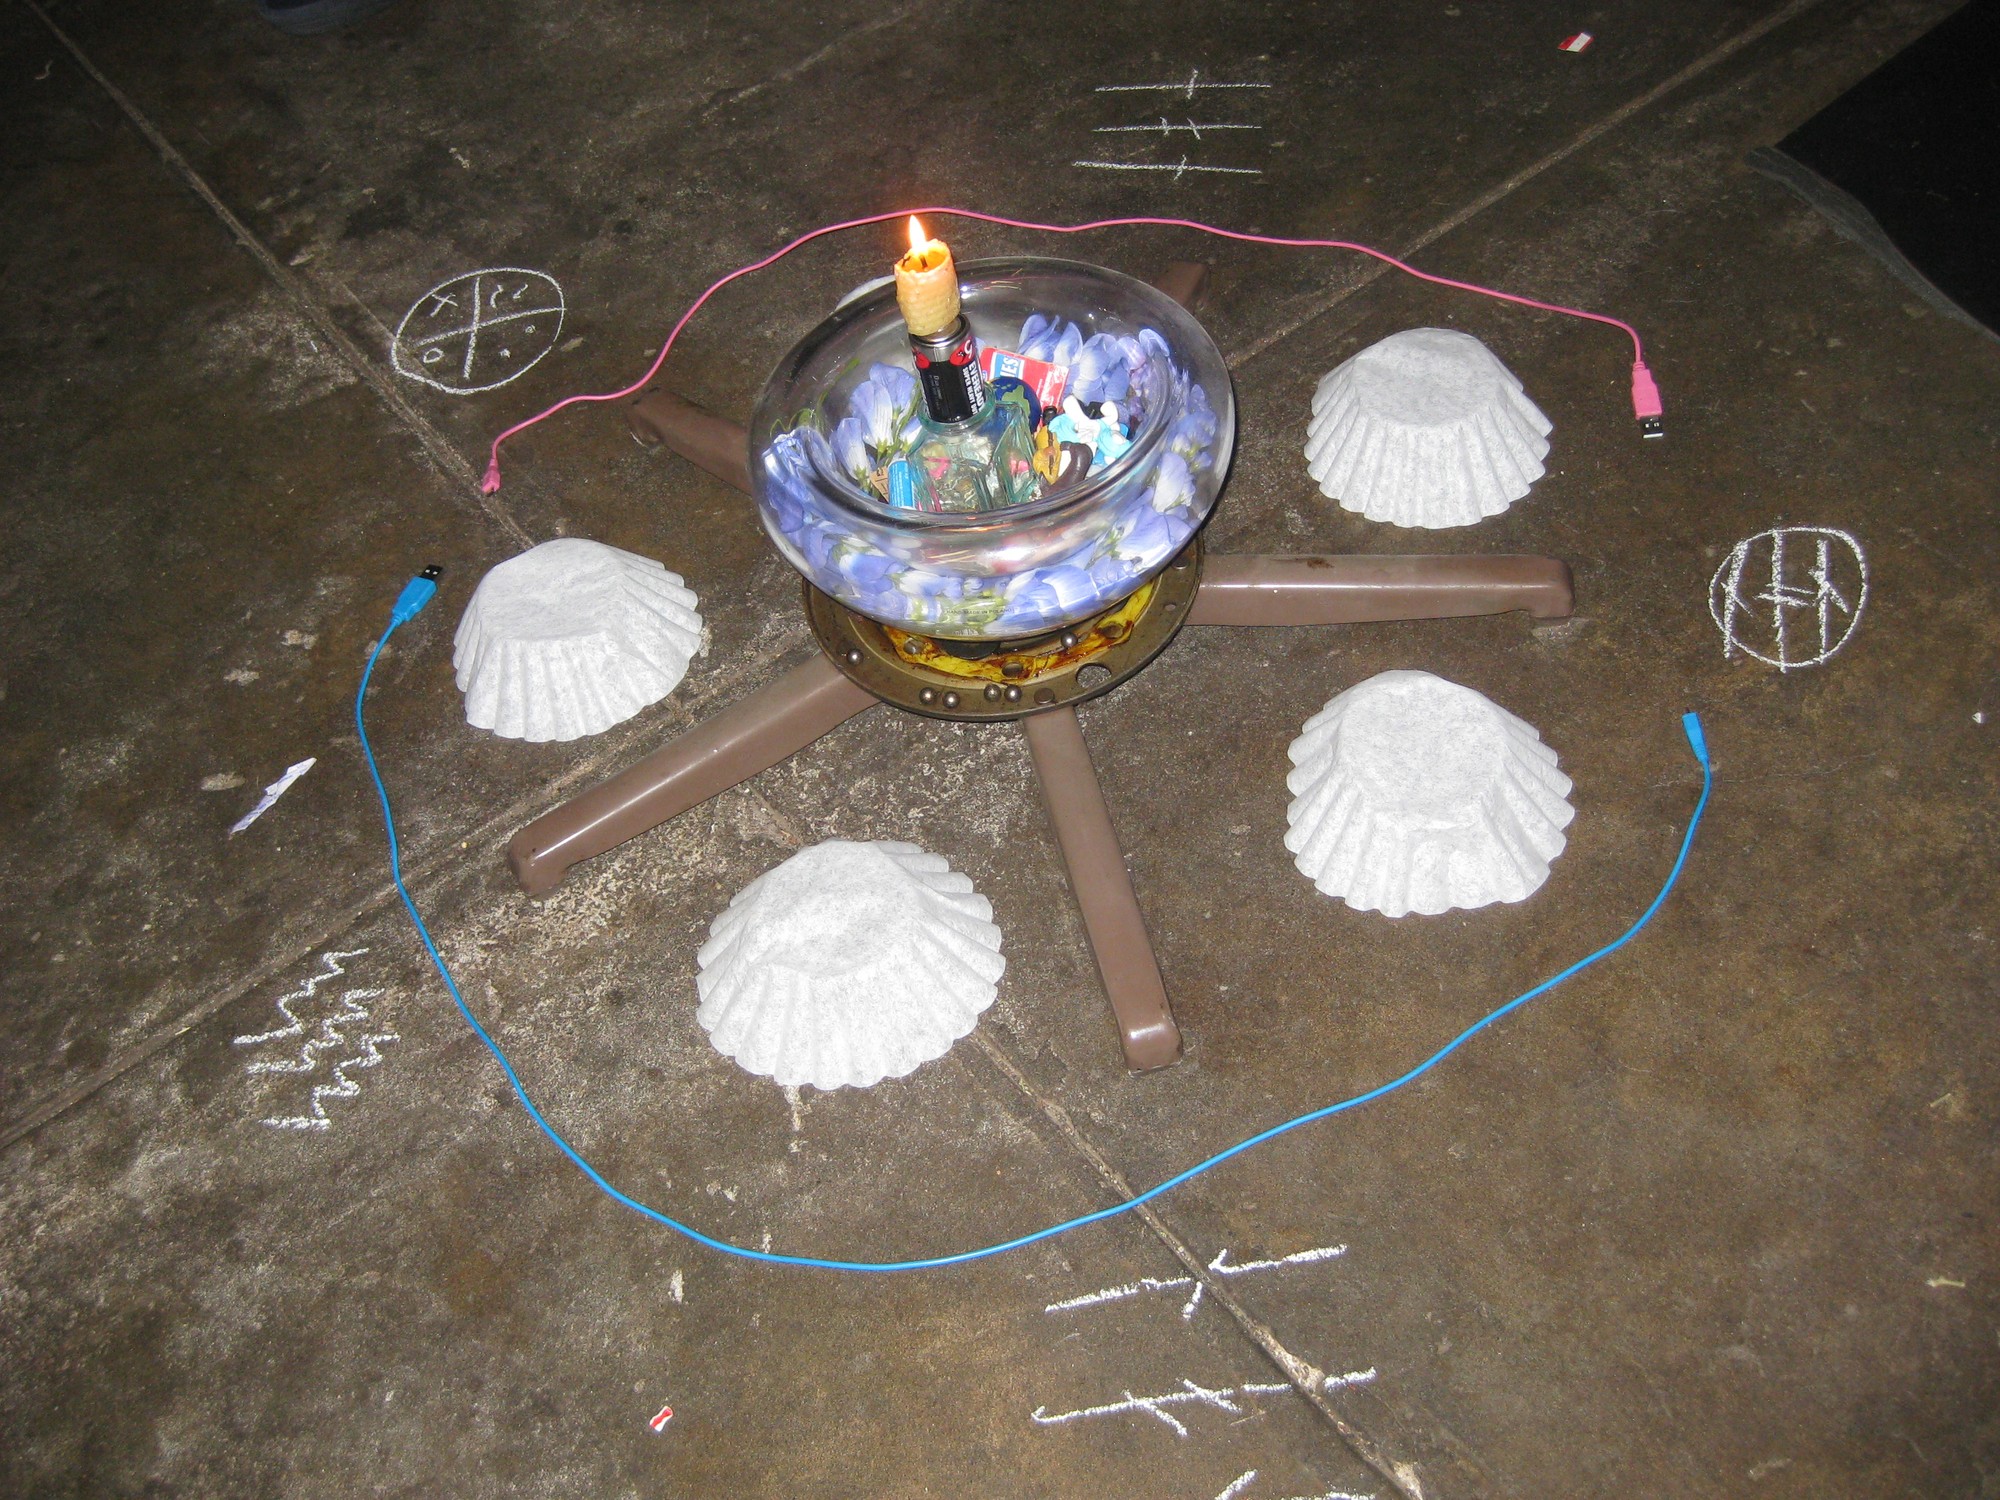 A metal base with five legs sits on a concrete floor circled by computer cables and symbols drawn with chalk. Between each leg is an upside-down coffee filter. A transparent bowl on top of the base has small objects inside, including blue flowers and a lit beeswax candle on top of a battery on top of a plastic ice cube.